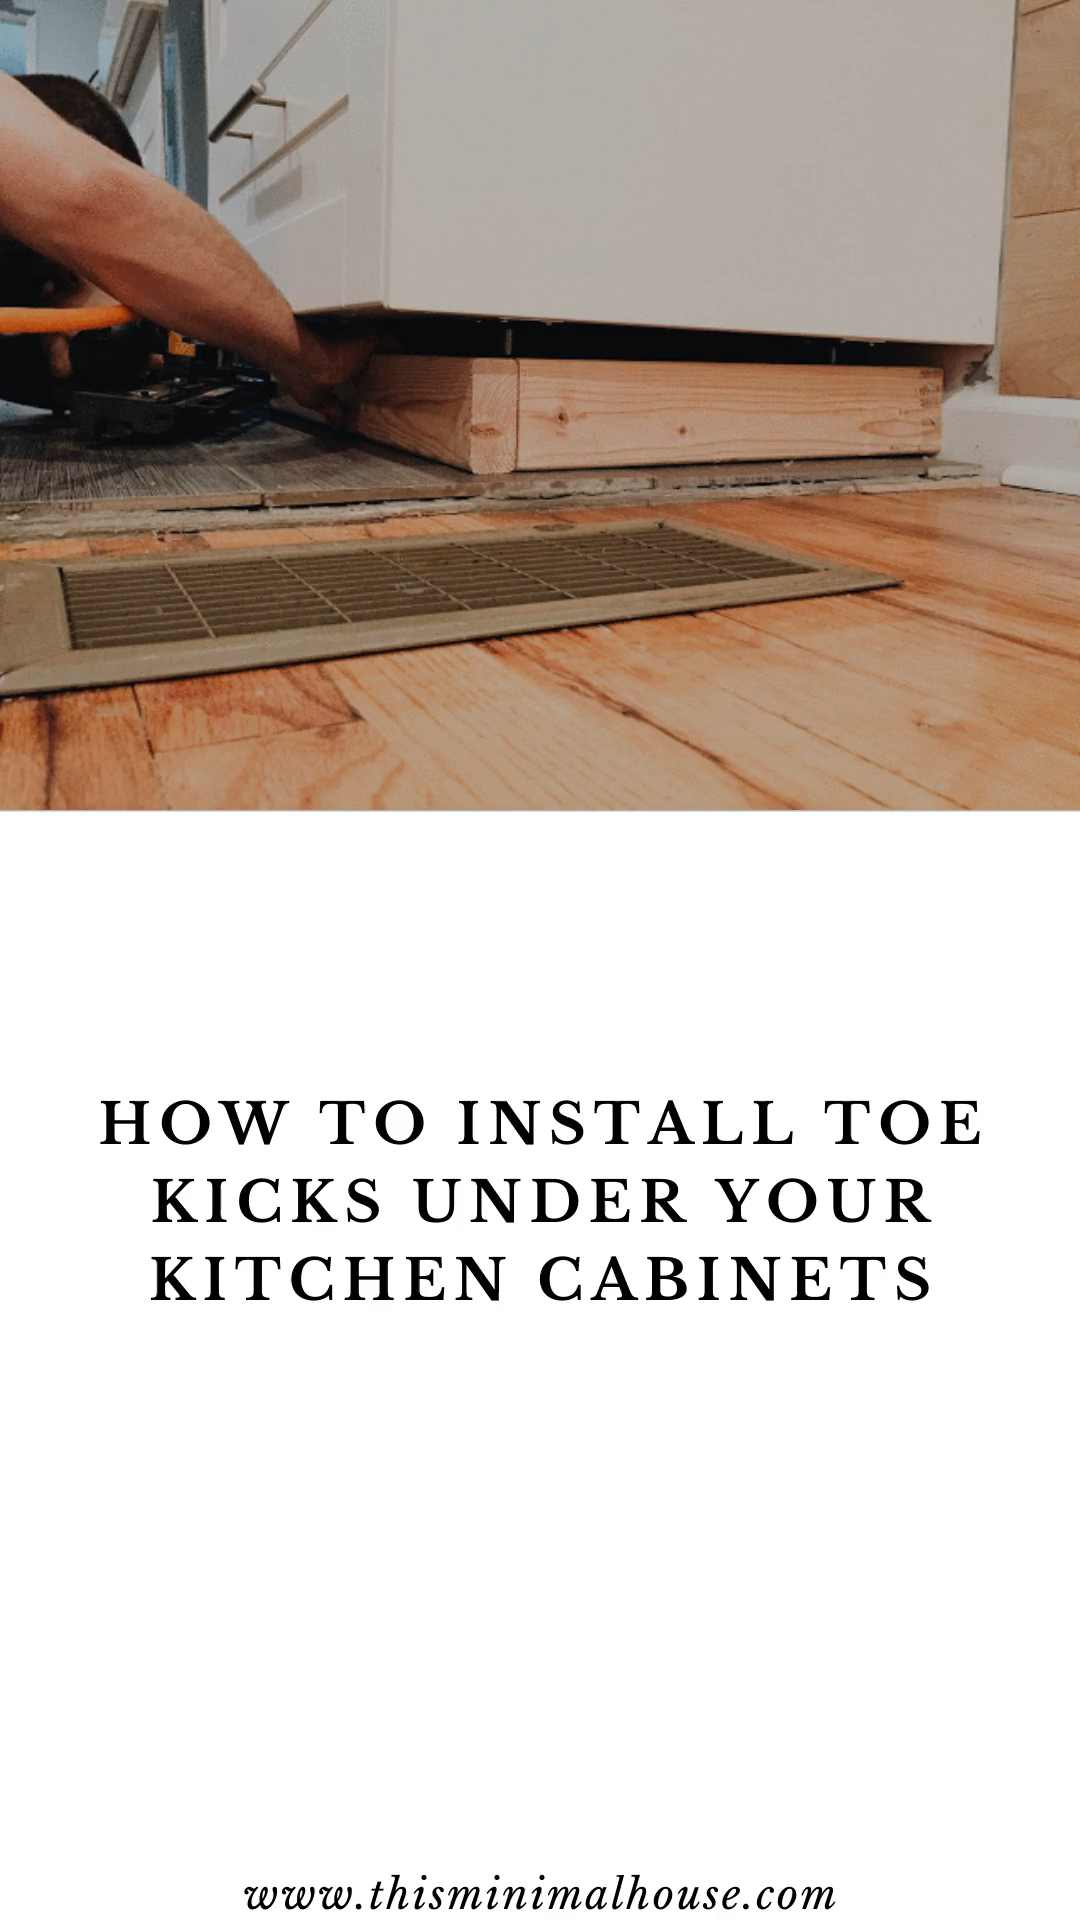 HOW TO INSTALL TOE KICKS UNDER YOUR KITCHEN CABINETS -   19 diy projects With Wood water ideas